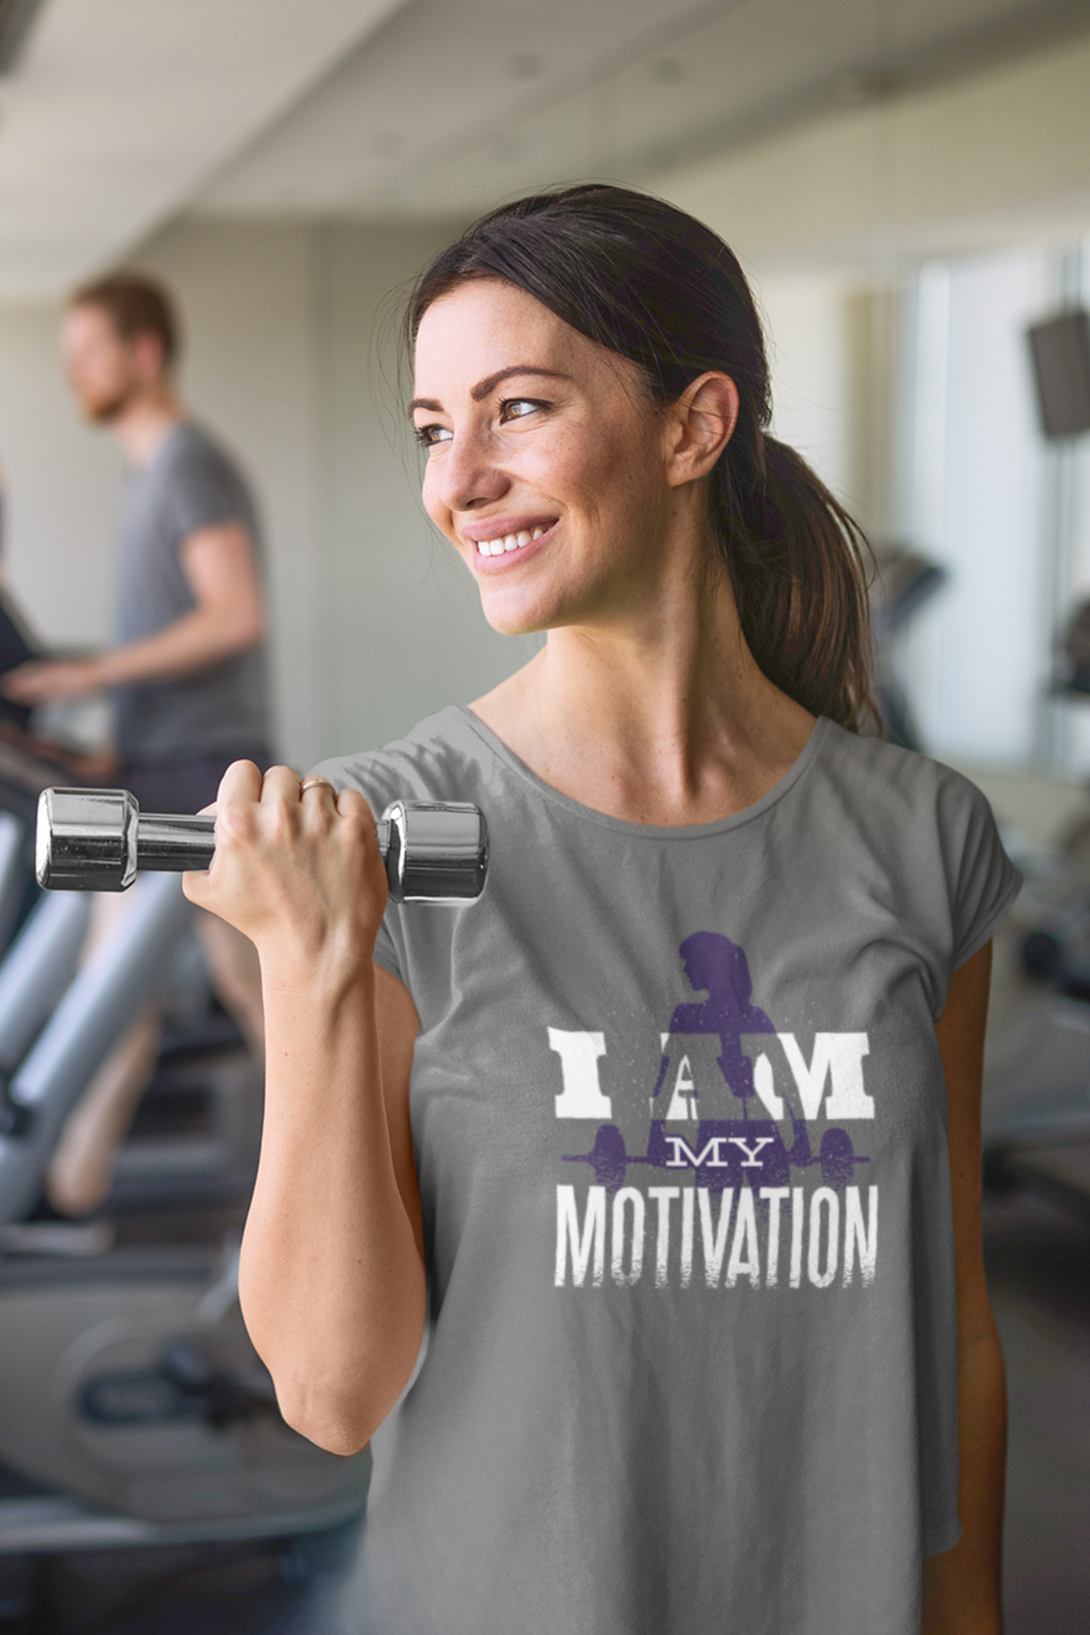 I Am My Motivation Printed Scoop Neck T-Shirt For Women - WowWaves - 6